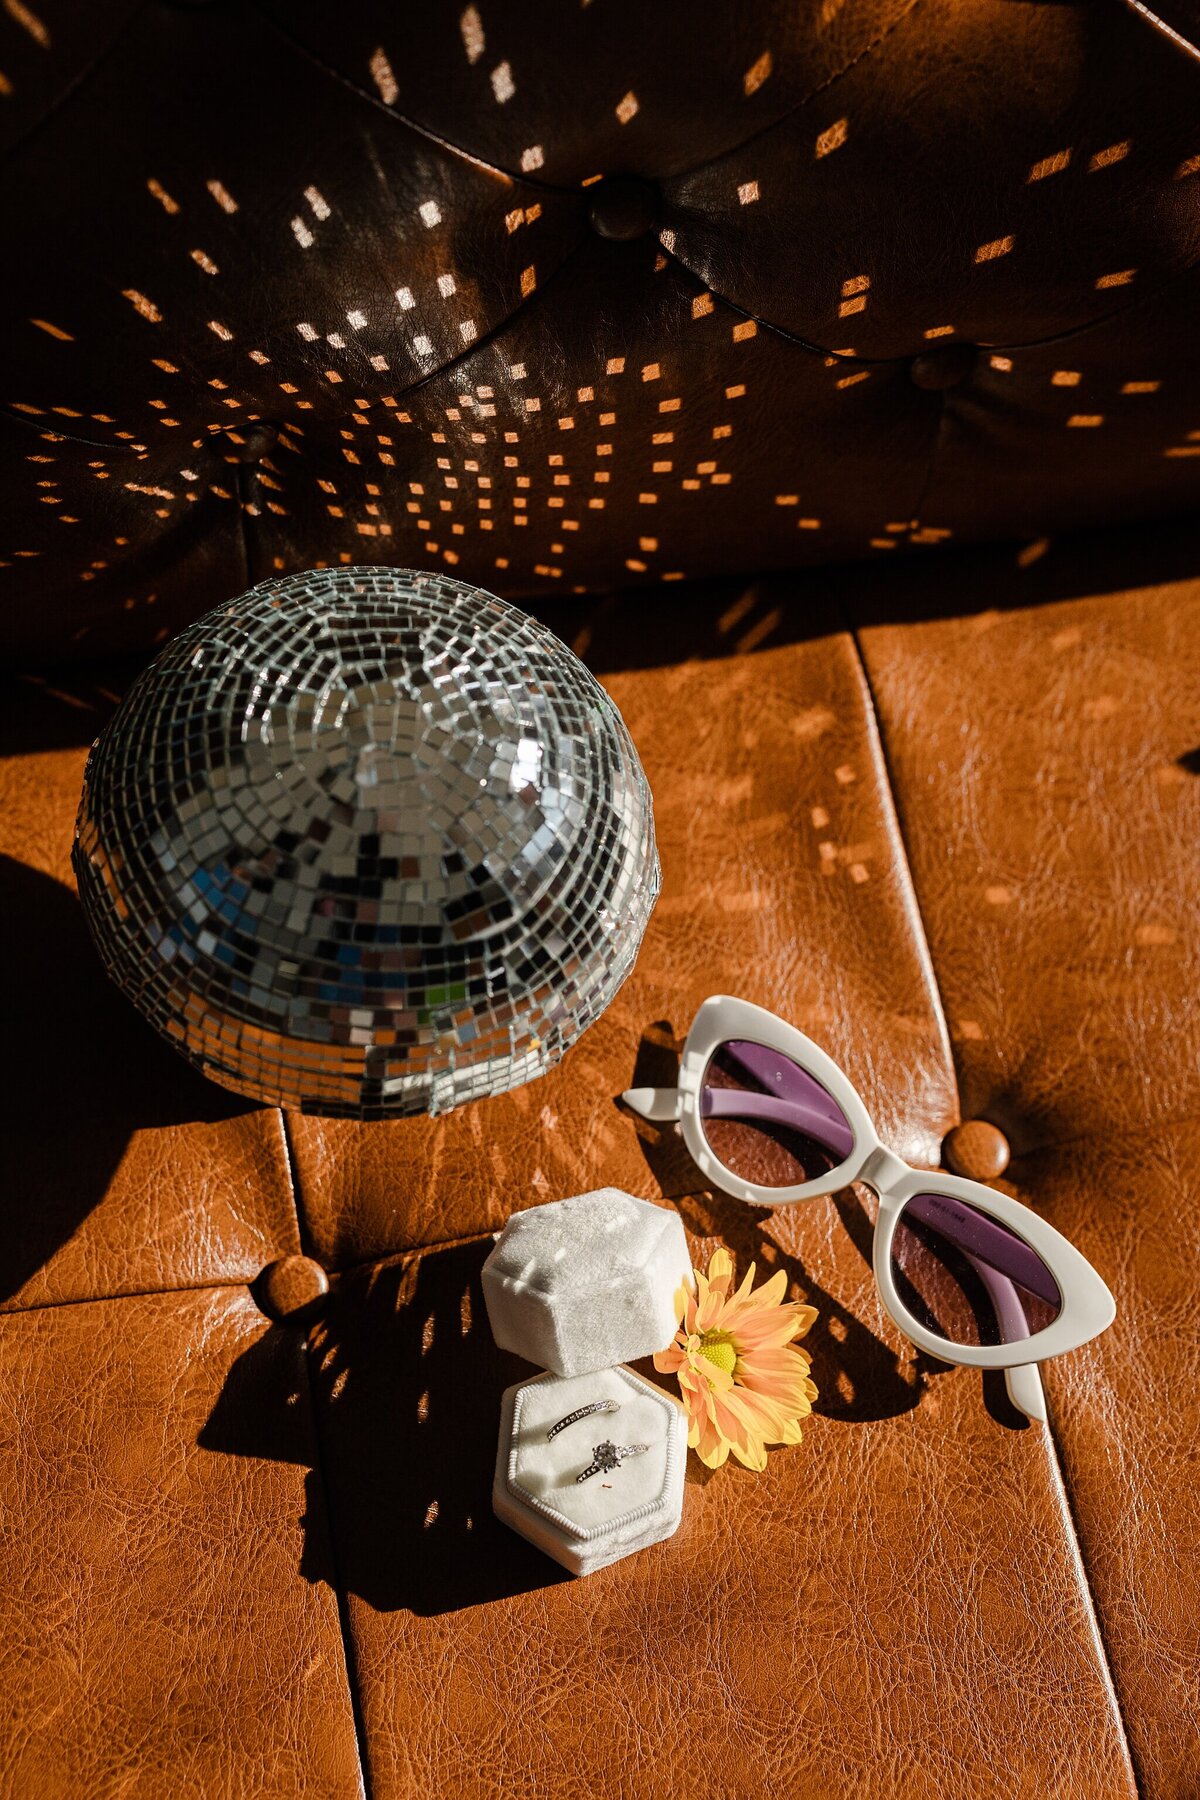 Detail shot of two rings in a white hexagonal ring box, a yellow flower, trendy white and purple sunglasses, and  disco ball resting on a leather couch. Light from the disco ball is reflecting interesting patterns onto the background.